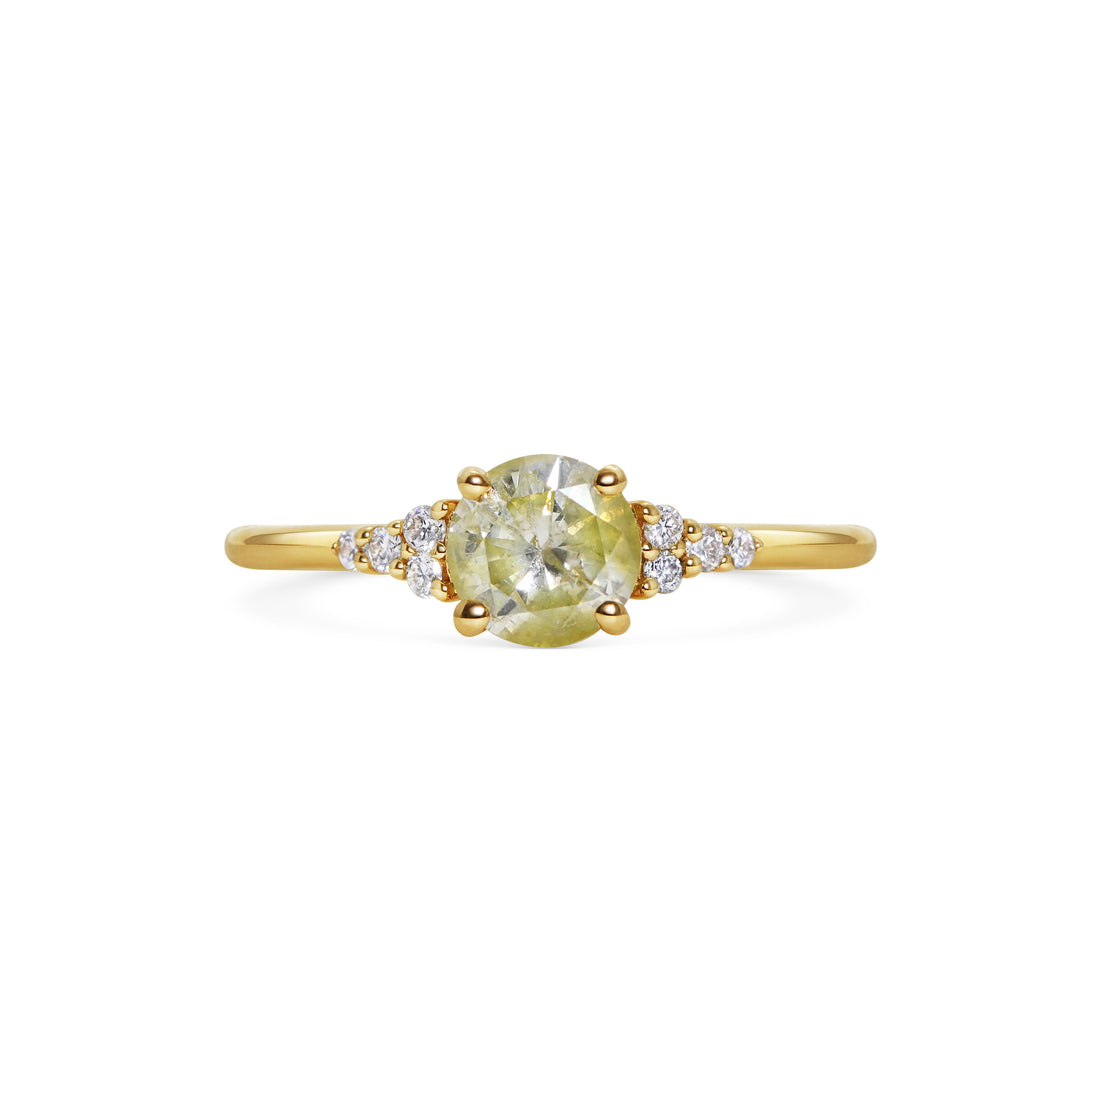  Natural Yellow Diamond Ring by Michelle Oh | The Cut London